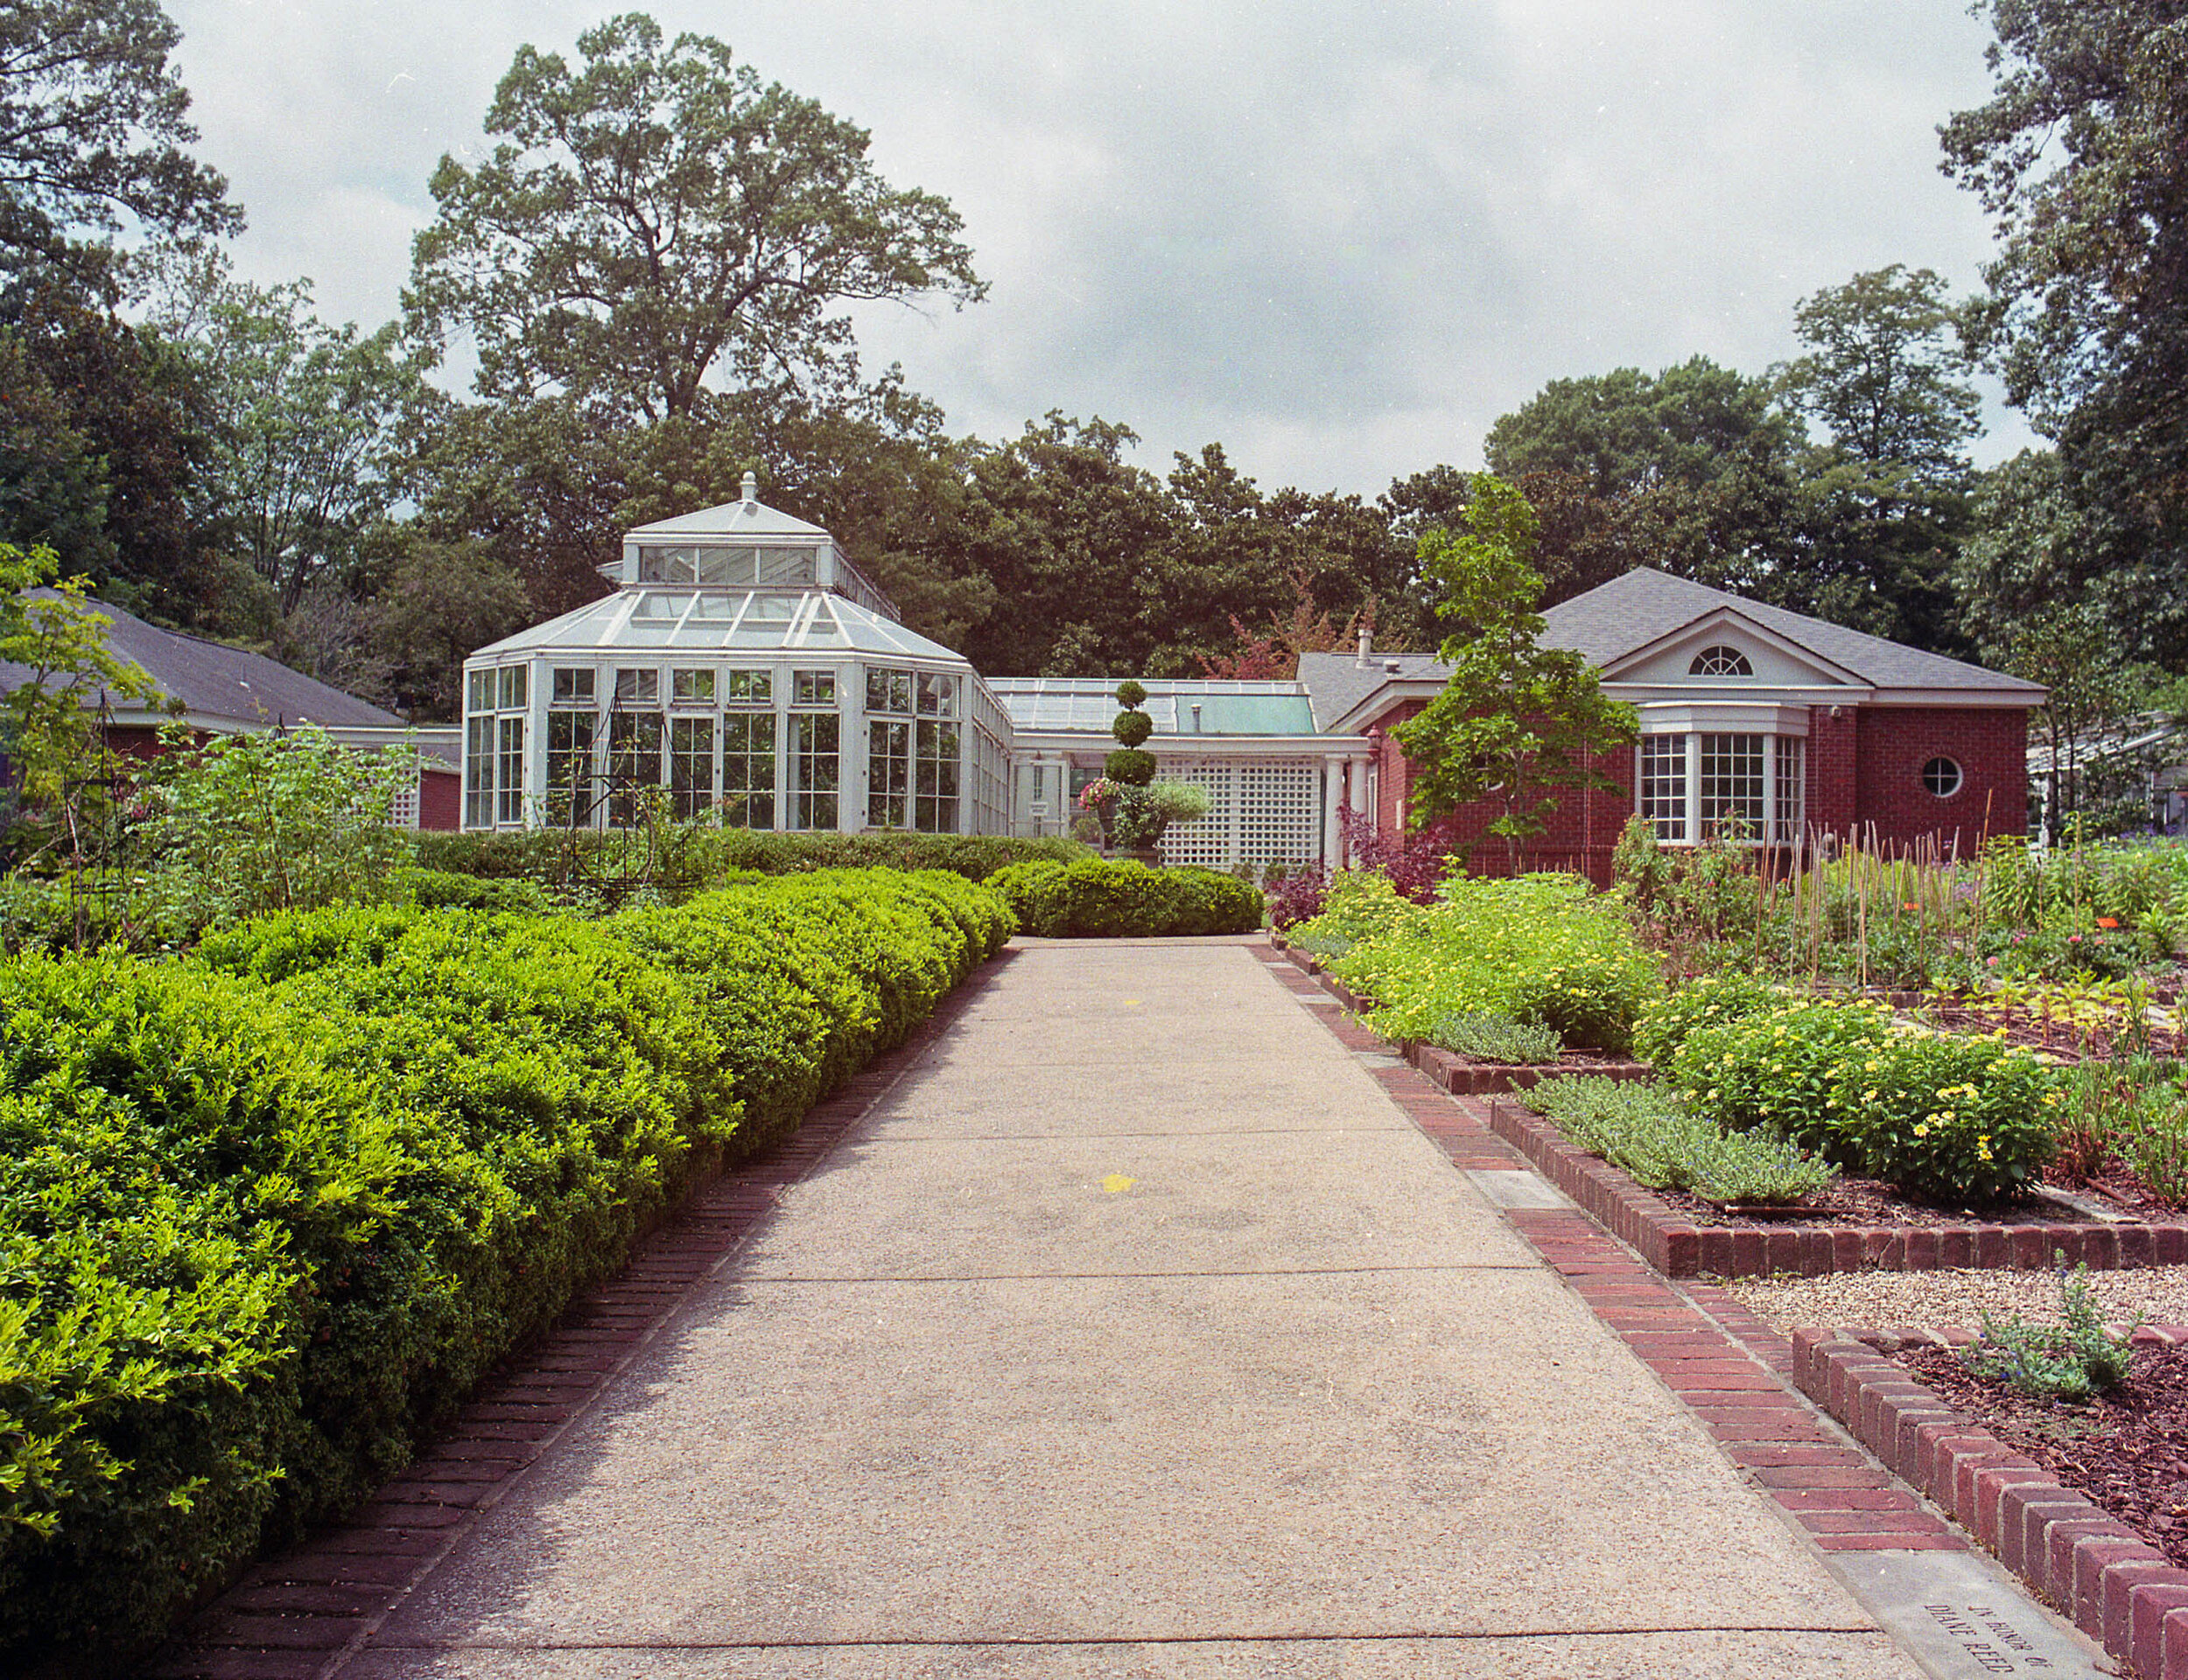 A welcoming path into the gardens.